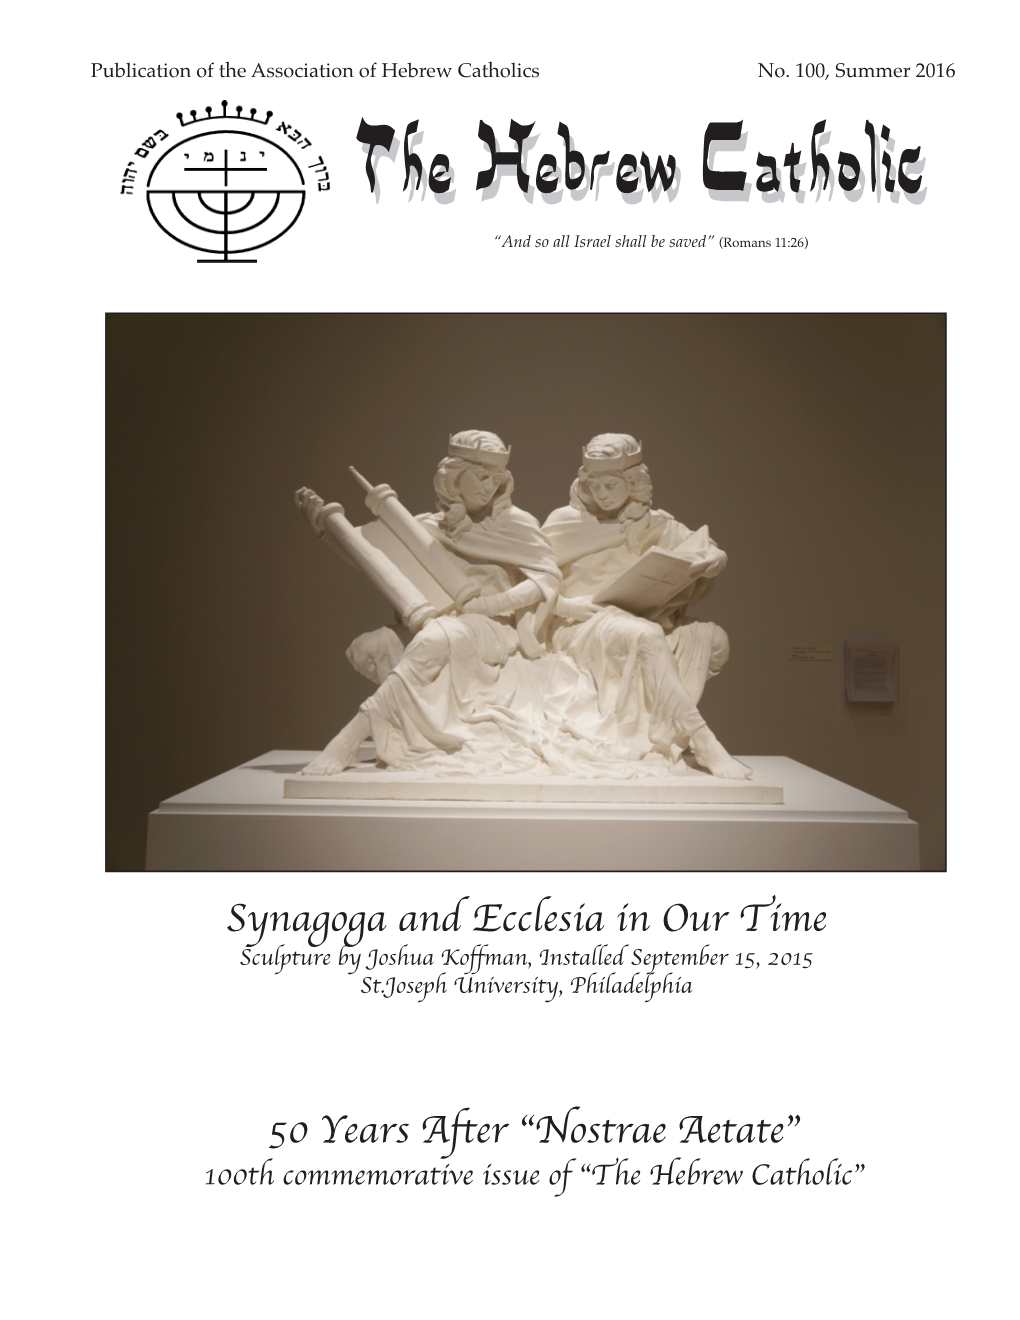 Synagoga and Ecclesia in Our Time 50 Years After